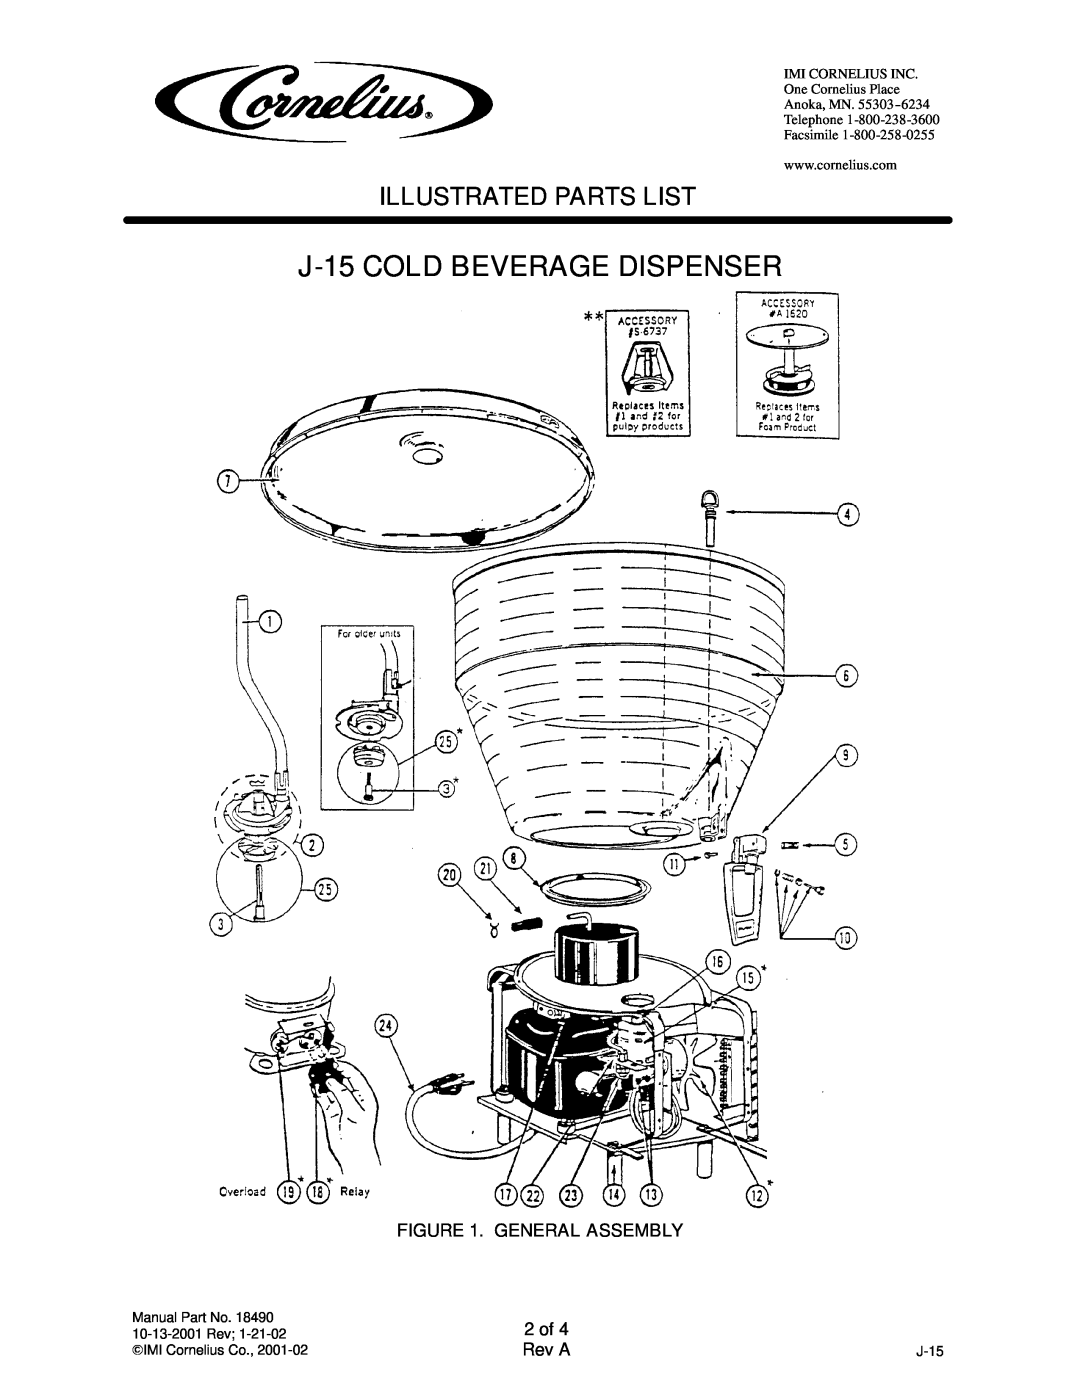 Cornelius A8661, A8663, A8662 manual J-15COLD BEVERAGE DISPENSER, General Assembly, 2 of, Illustrated Parts List, Rev A 